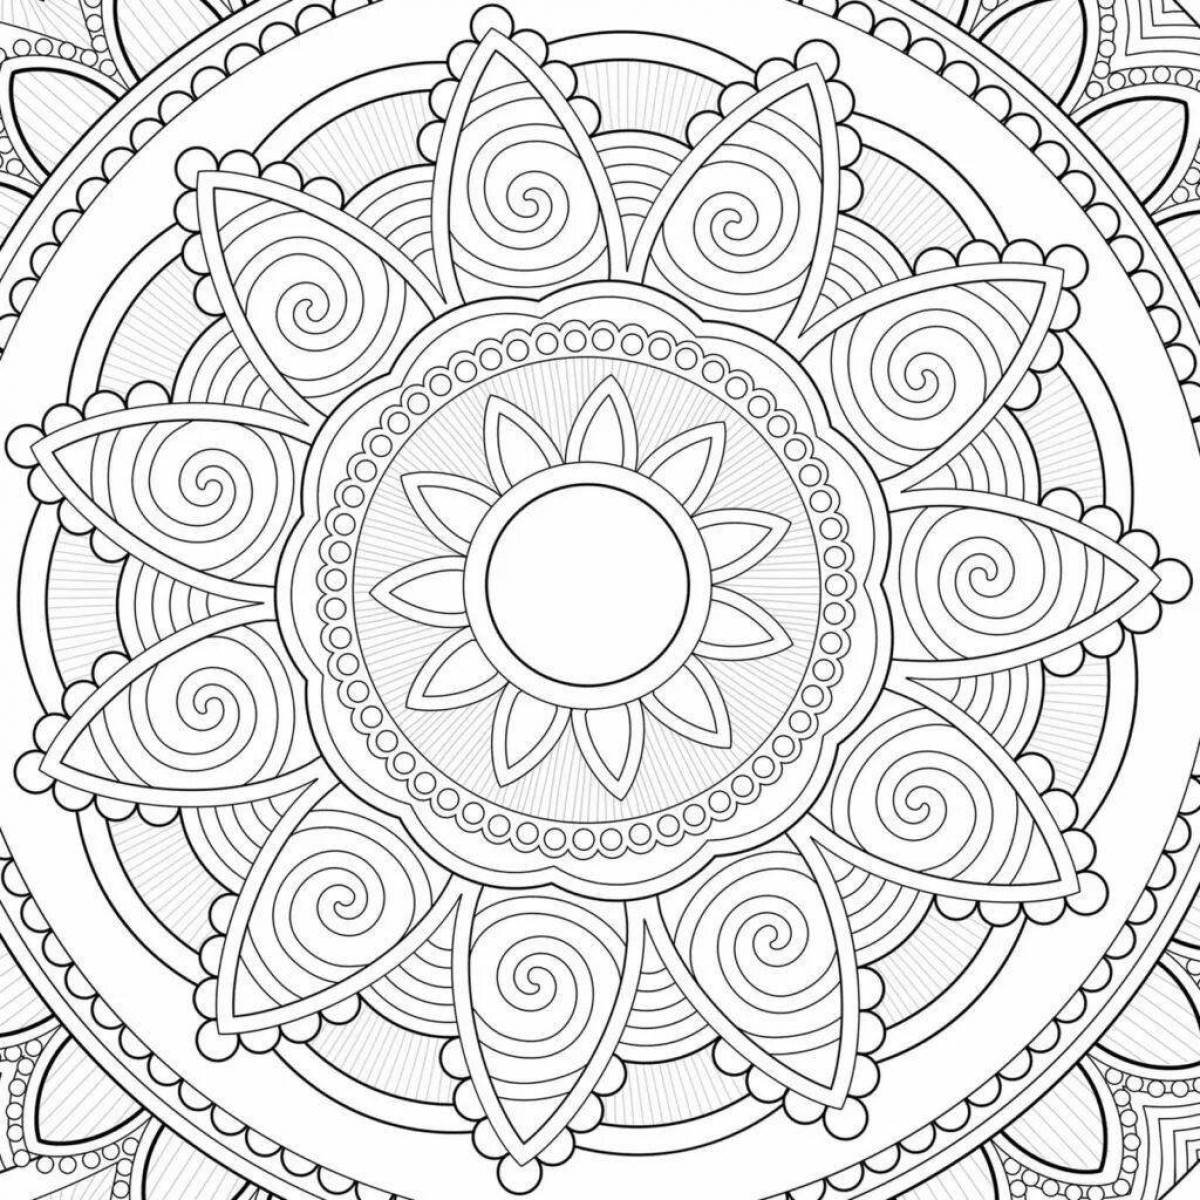 Exciting anti-stress spiral coloring book